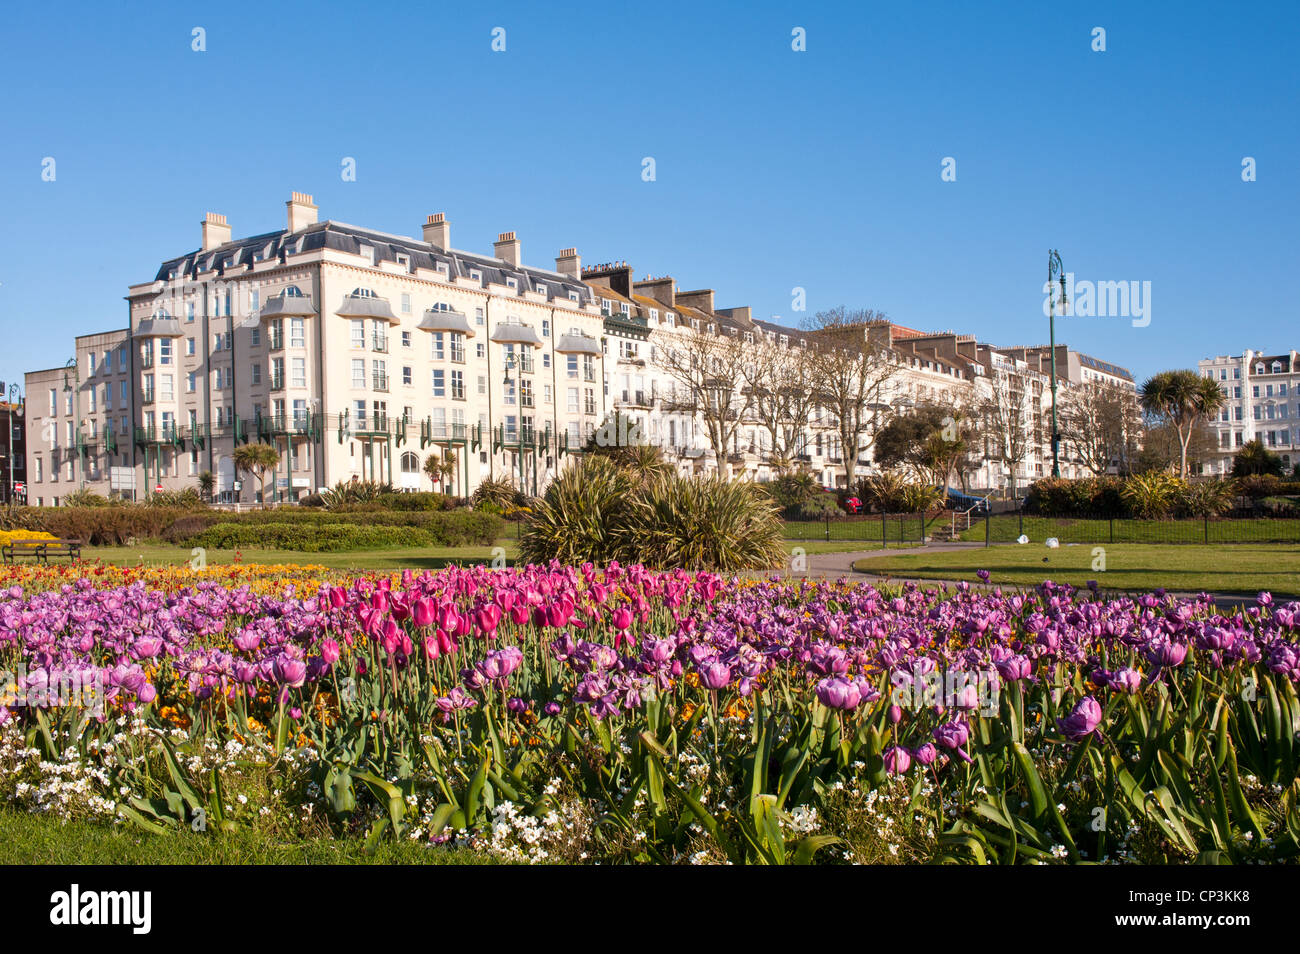 HASTINGS, EAST SUSSEX, UK - APRIL 30, 2012: Small garden on Grand Parade lined with attractive Victorian buildings Stock Photo